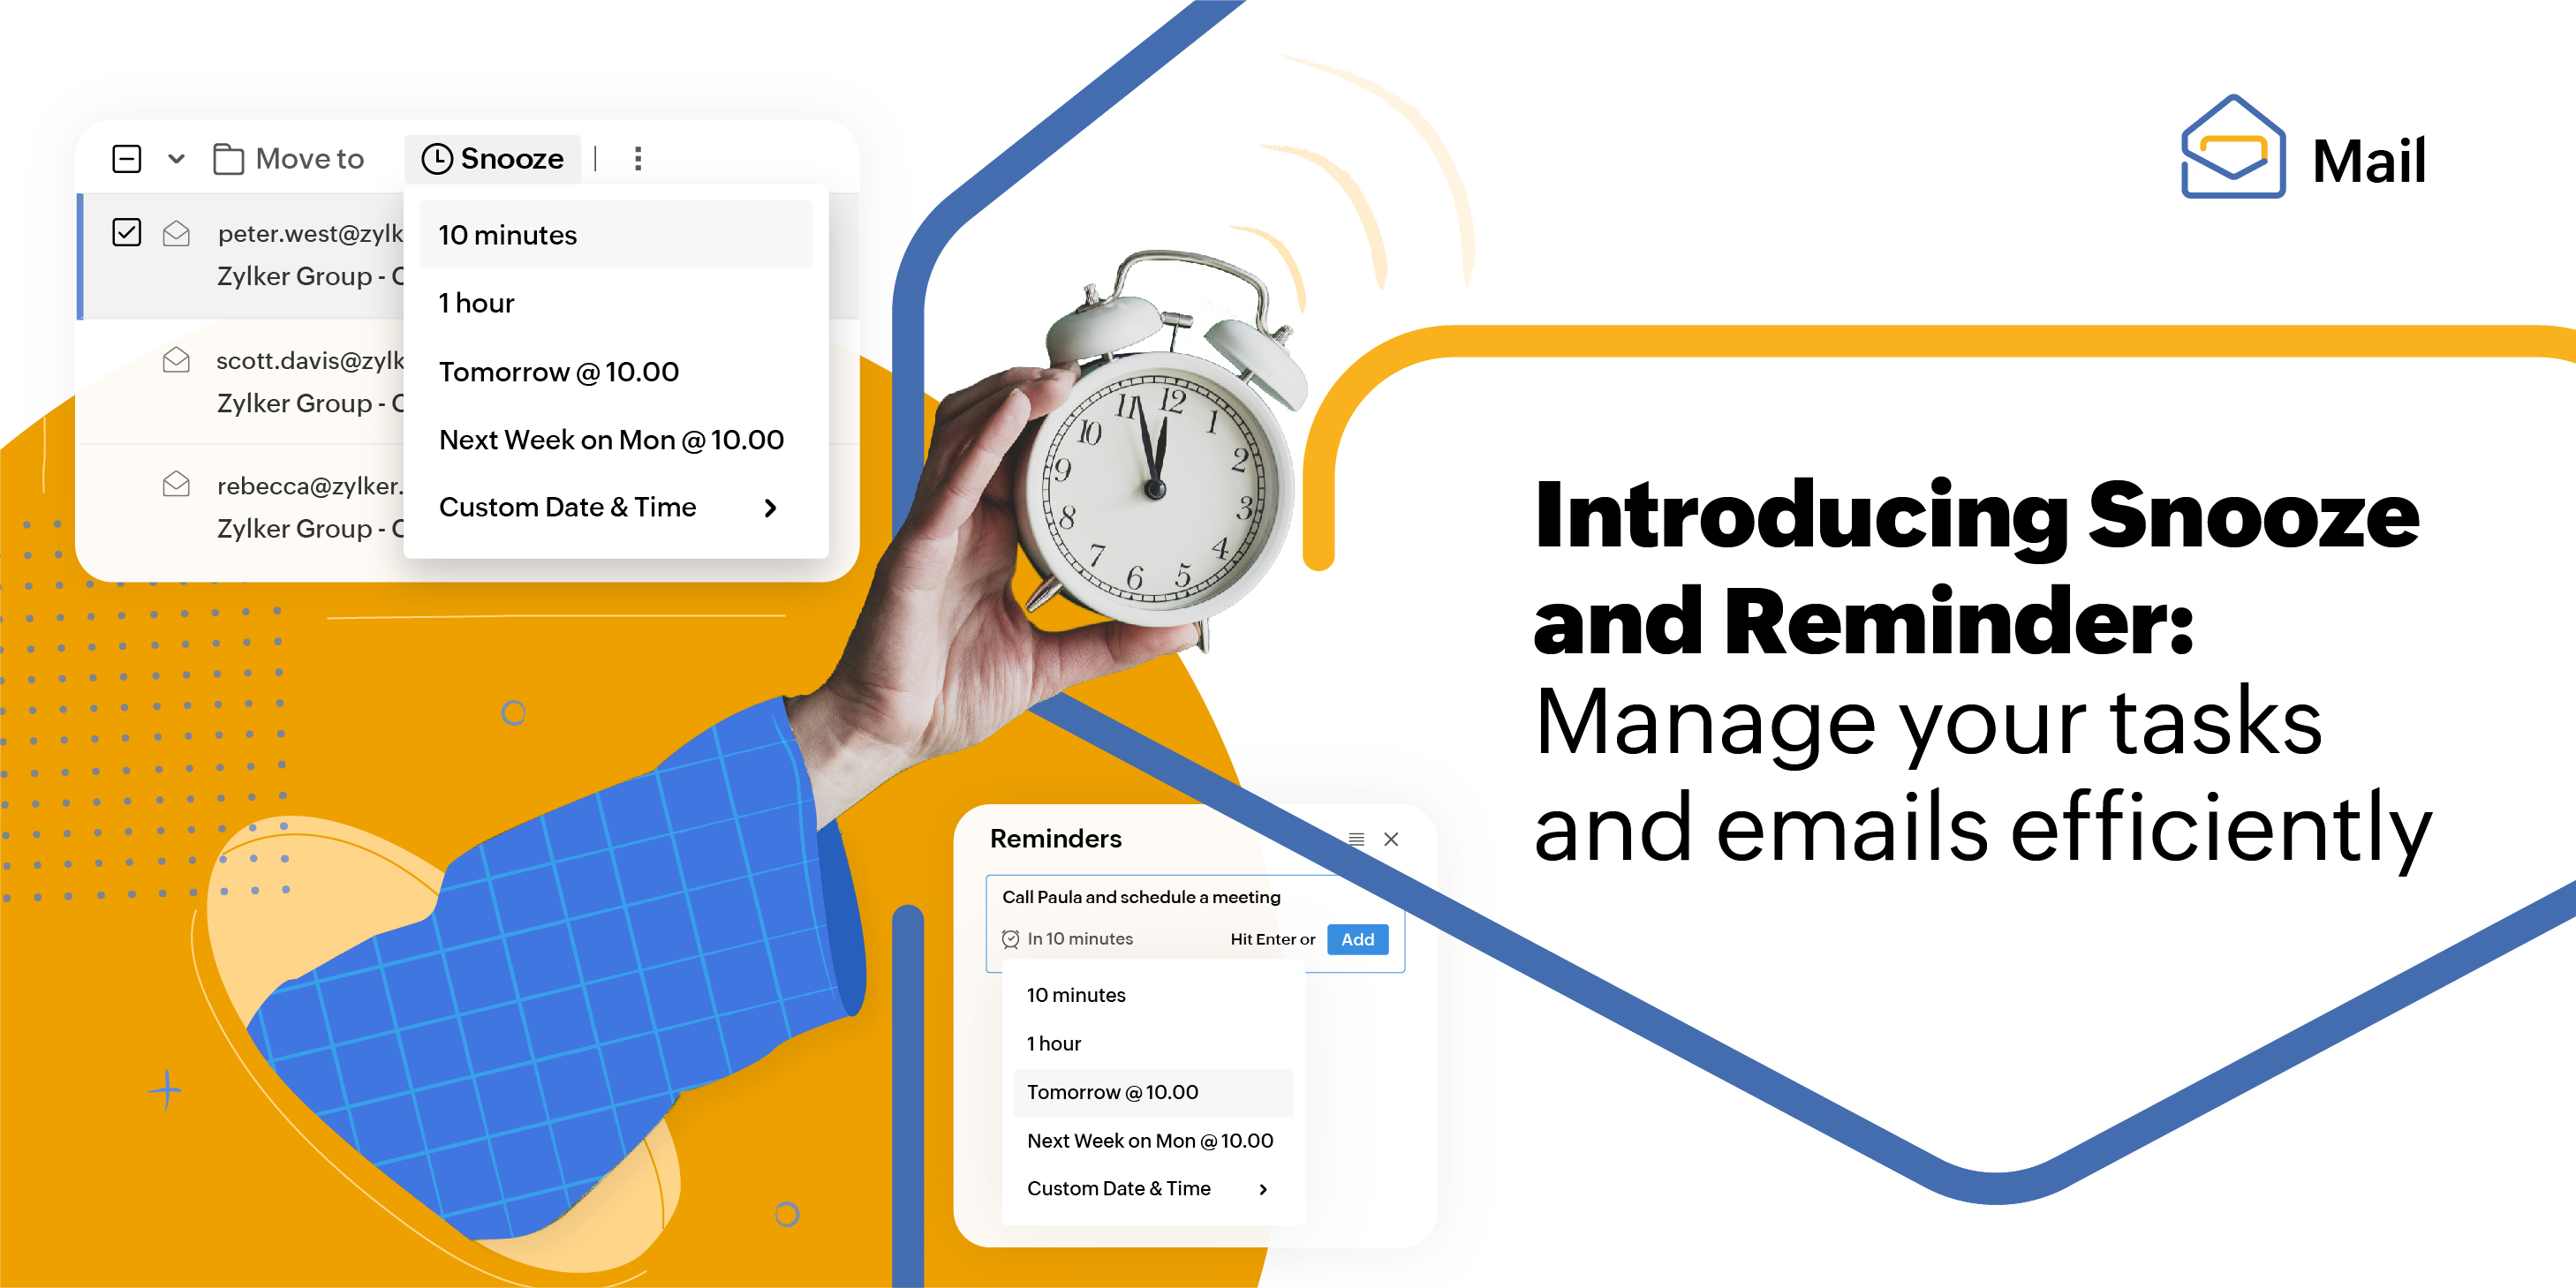 Snooze and Reminders: Stay on top of your emails and tasks!